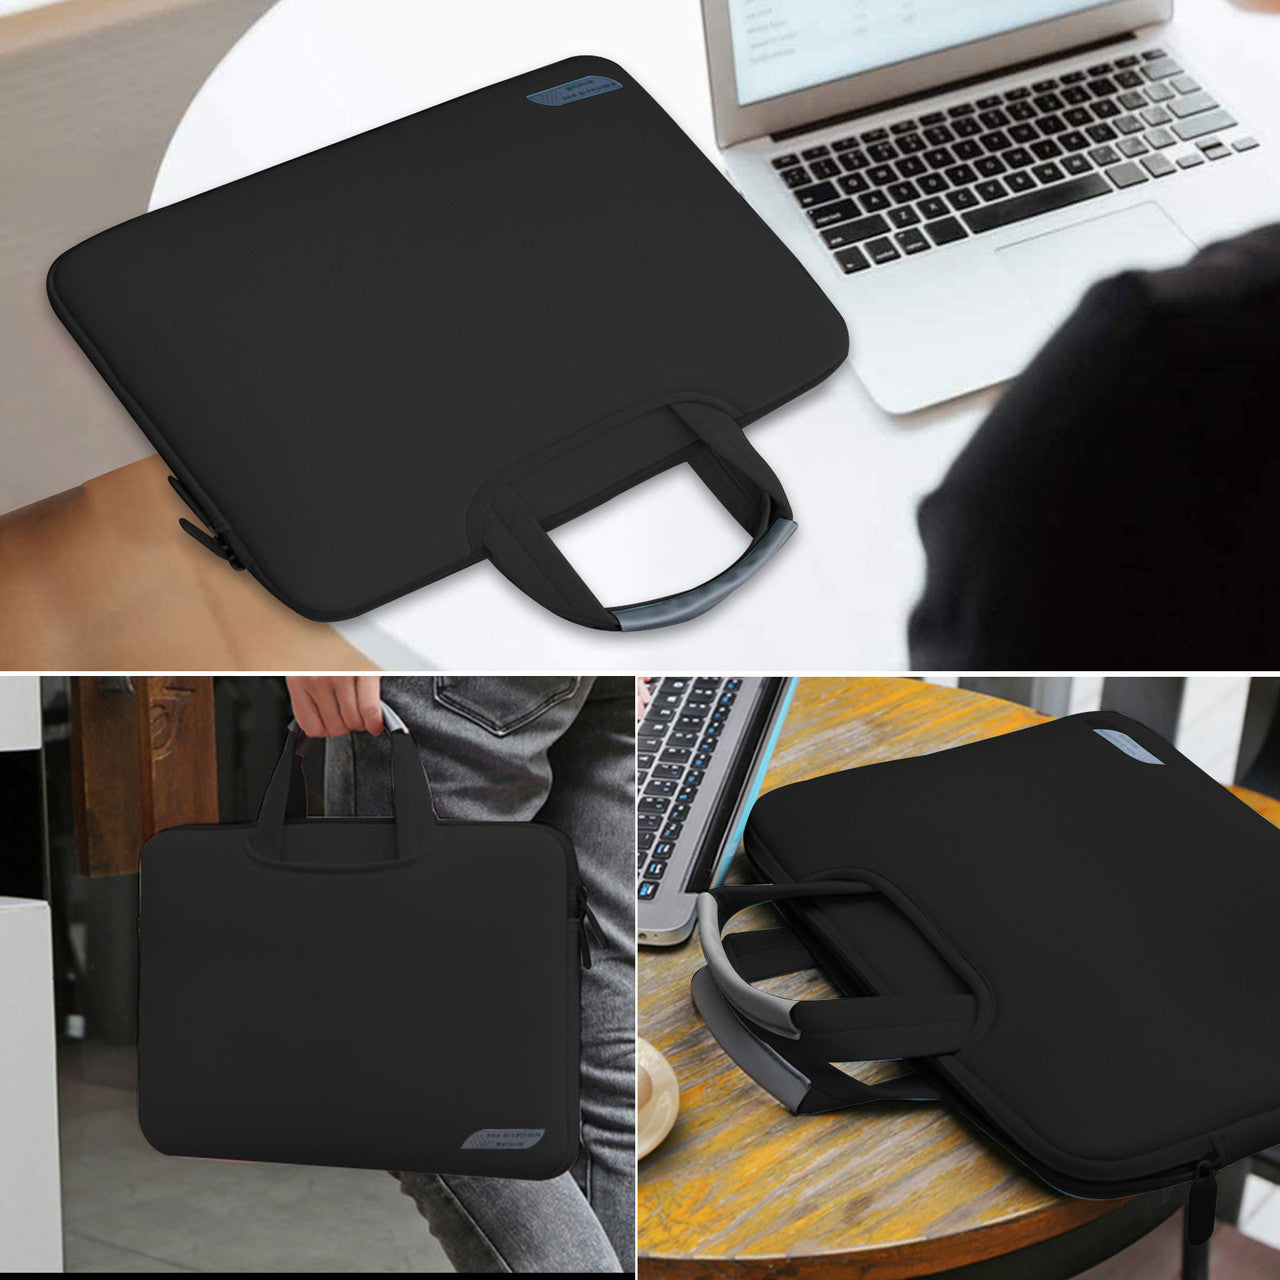 Laptop Sleeve Case 360° Protective Computer Bag Fits for 14 Inch laptops and Macs- Water Repellent